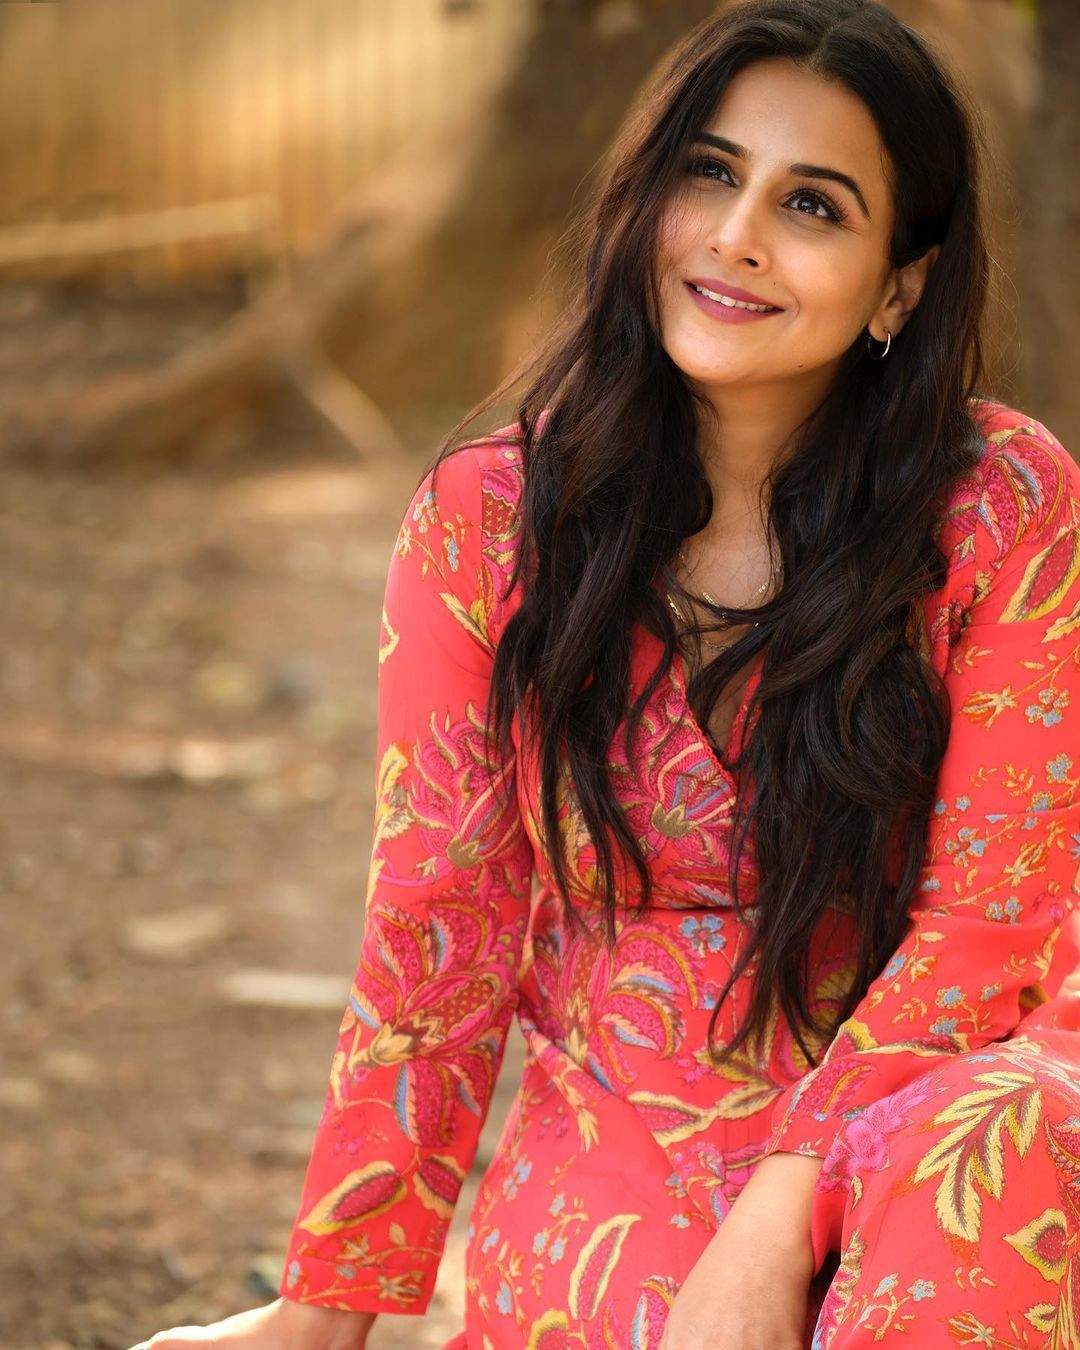 Vidya Balan recalls waiting all day in Film City to audition for Hum Paanch, had nearly given up hope of getting called